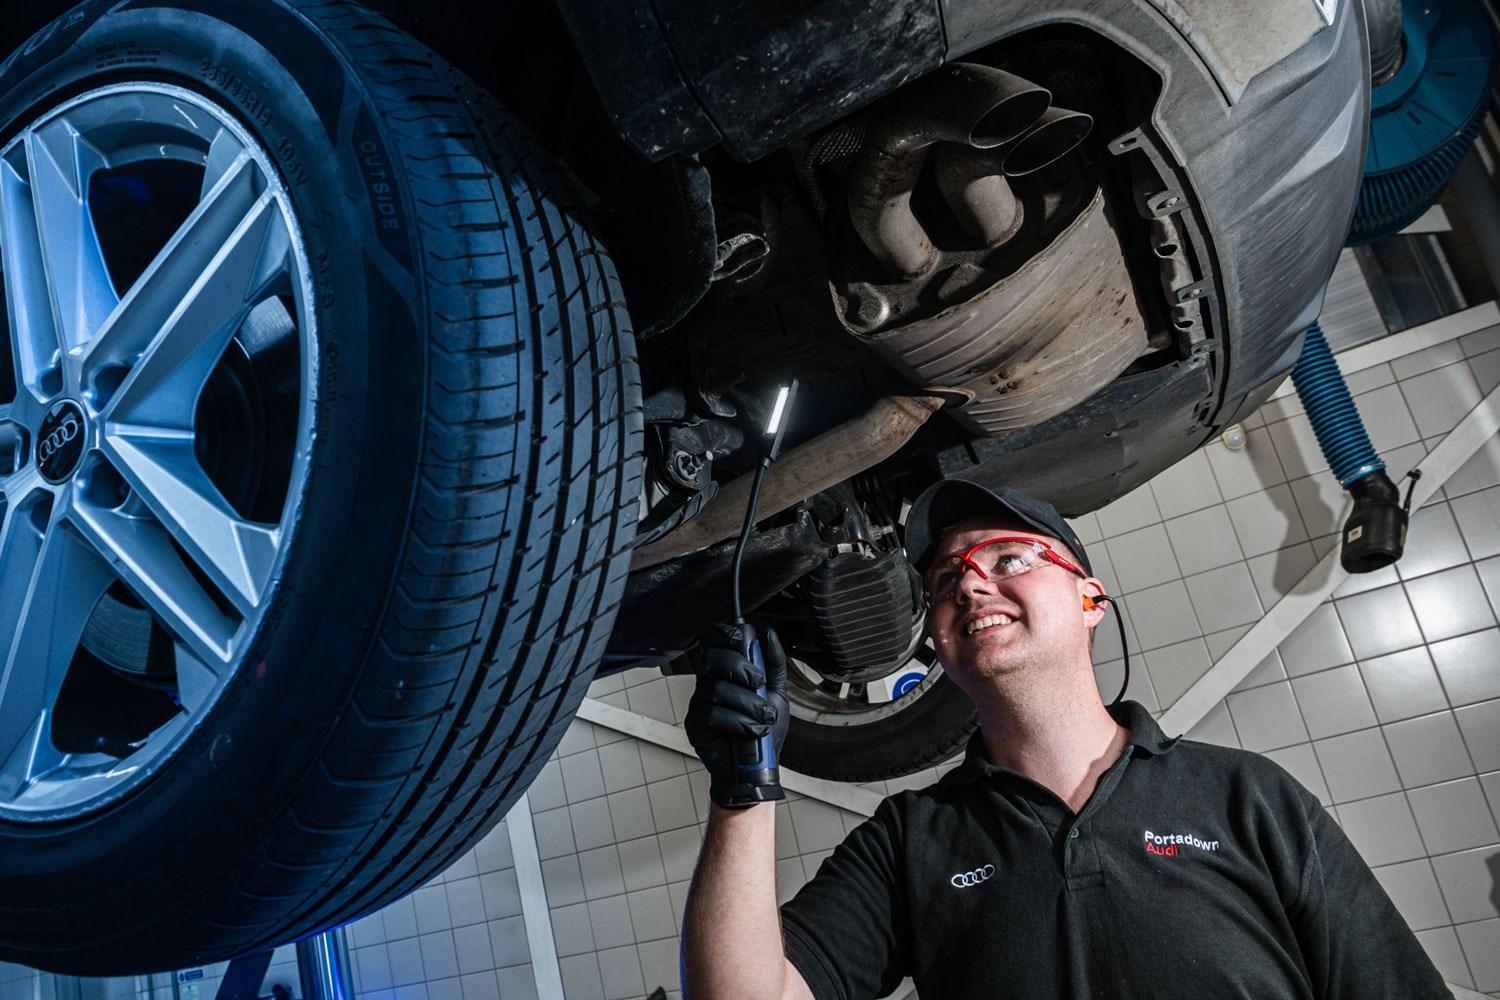 Audi Repair Specialist checks the undercarriage of an Audi A3 with a handheld light during repair